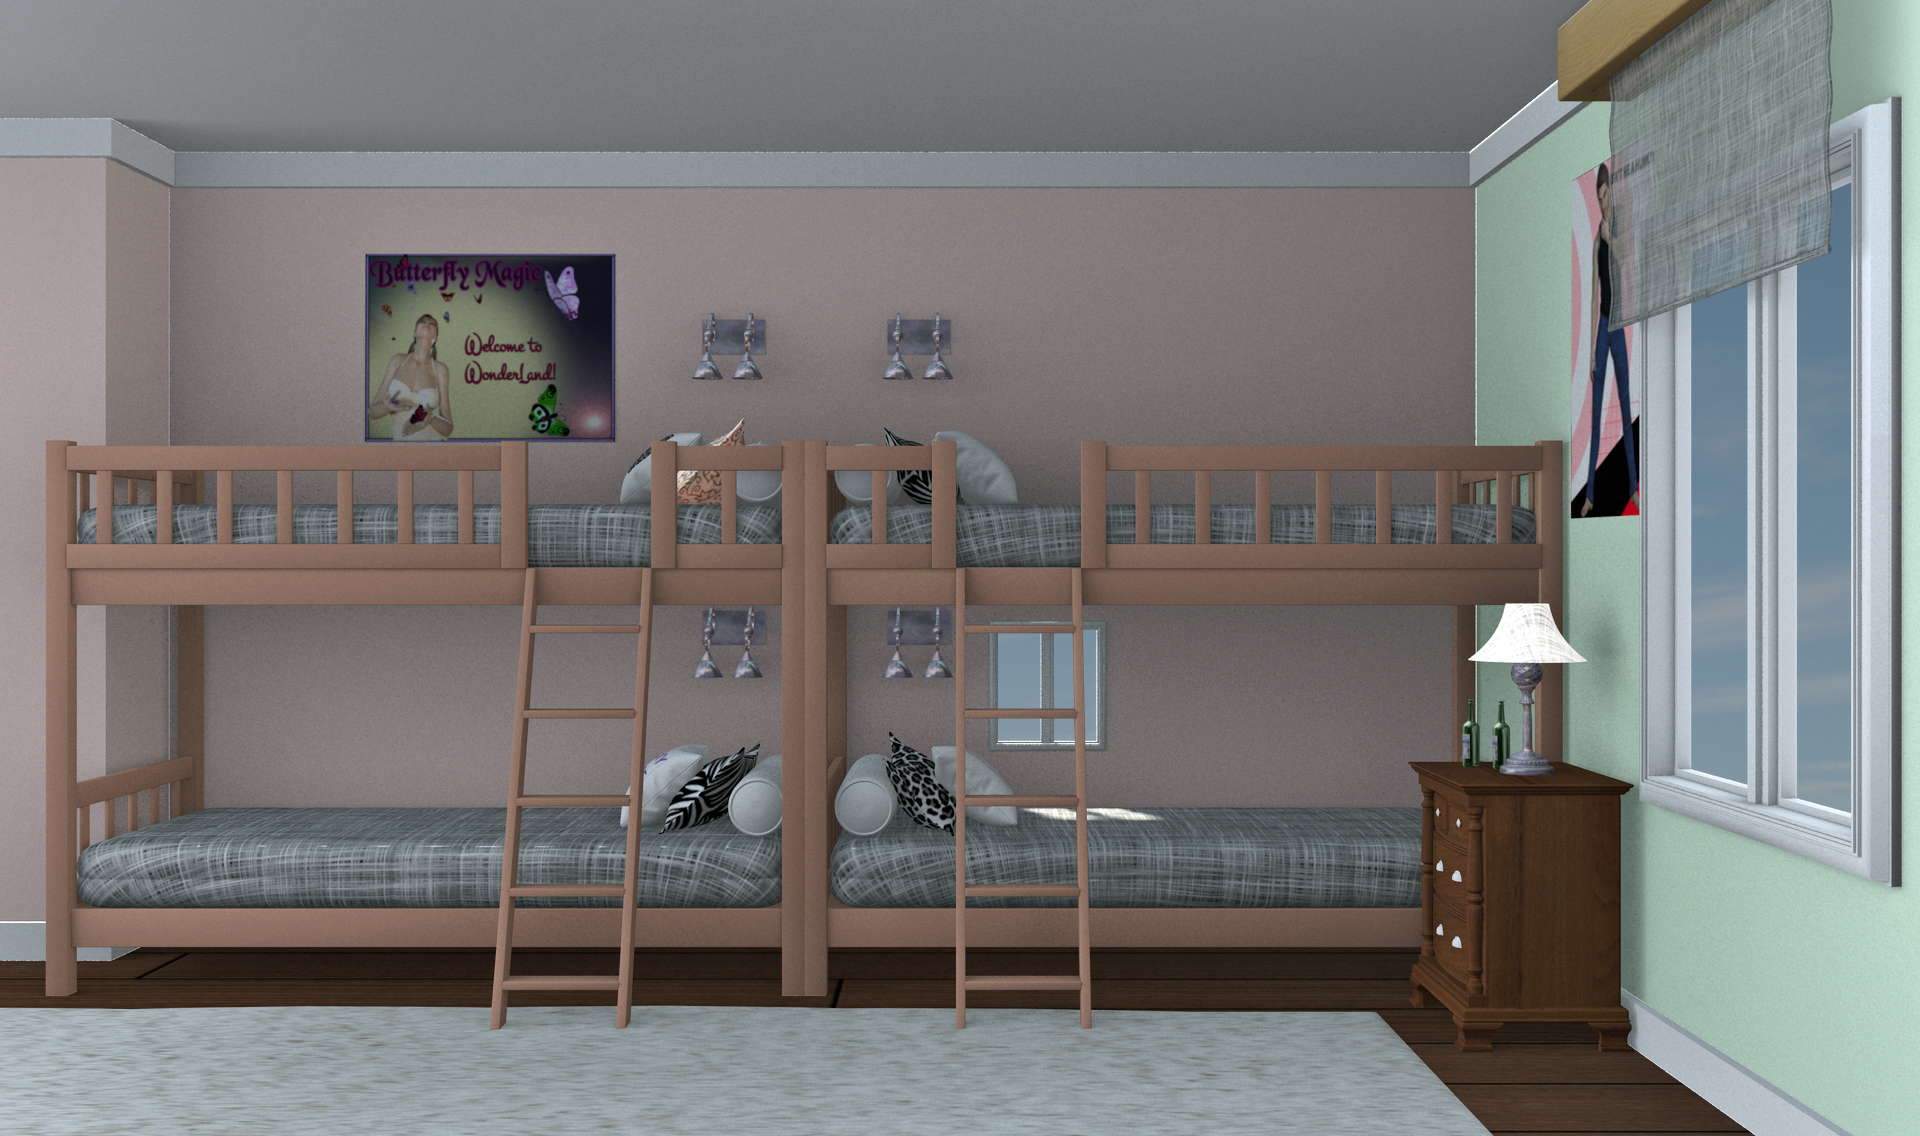 INT. COLLEGE DORM W/BUNK BEDS 2 – DAY